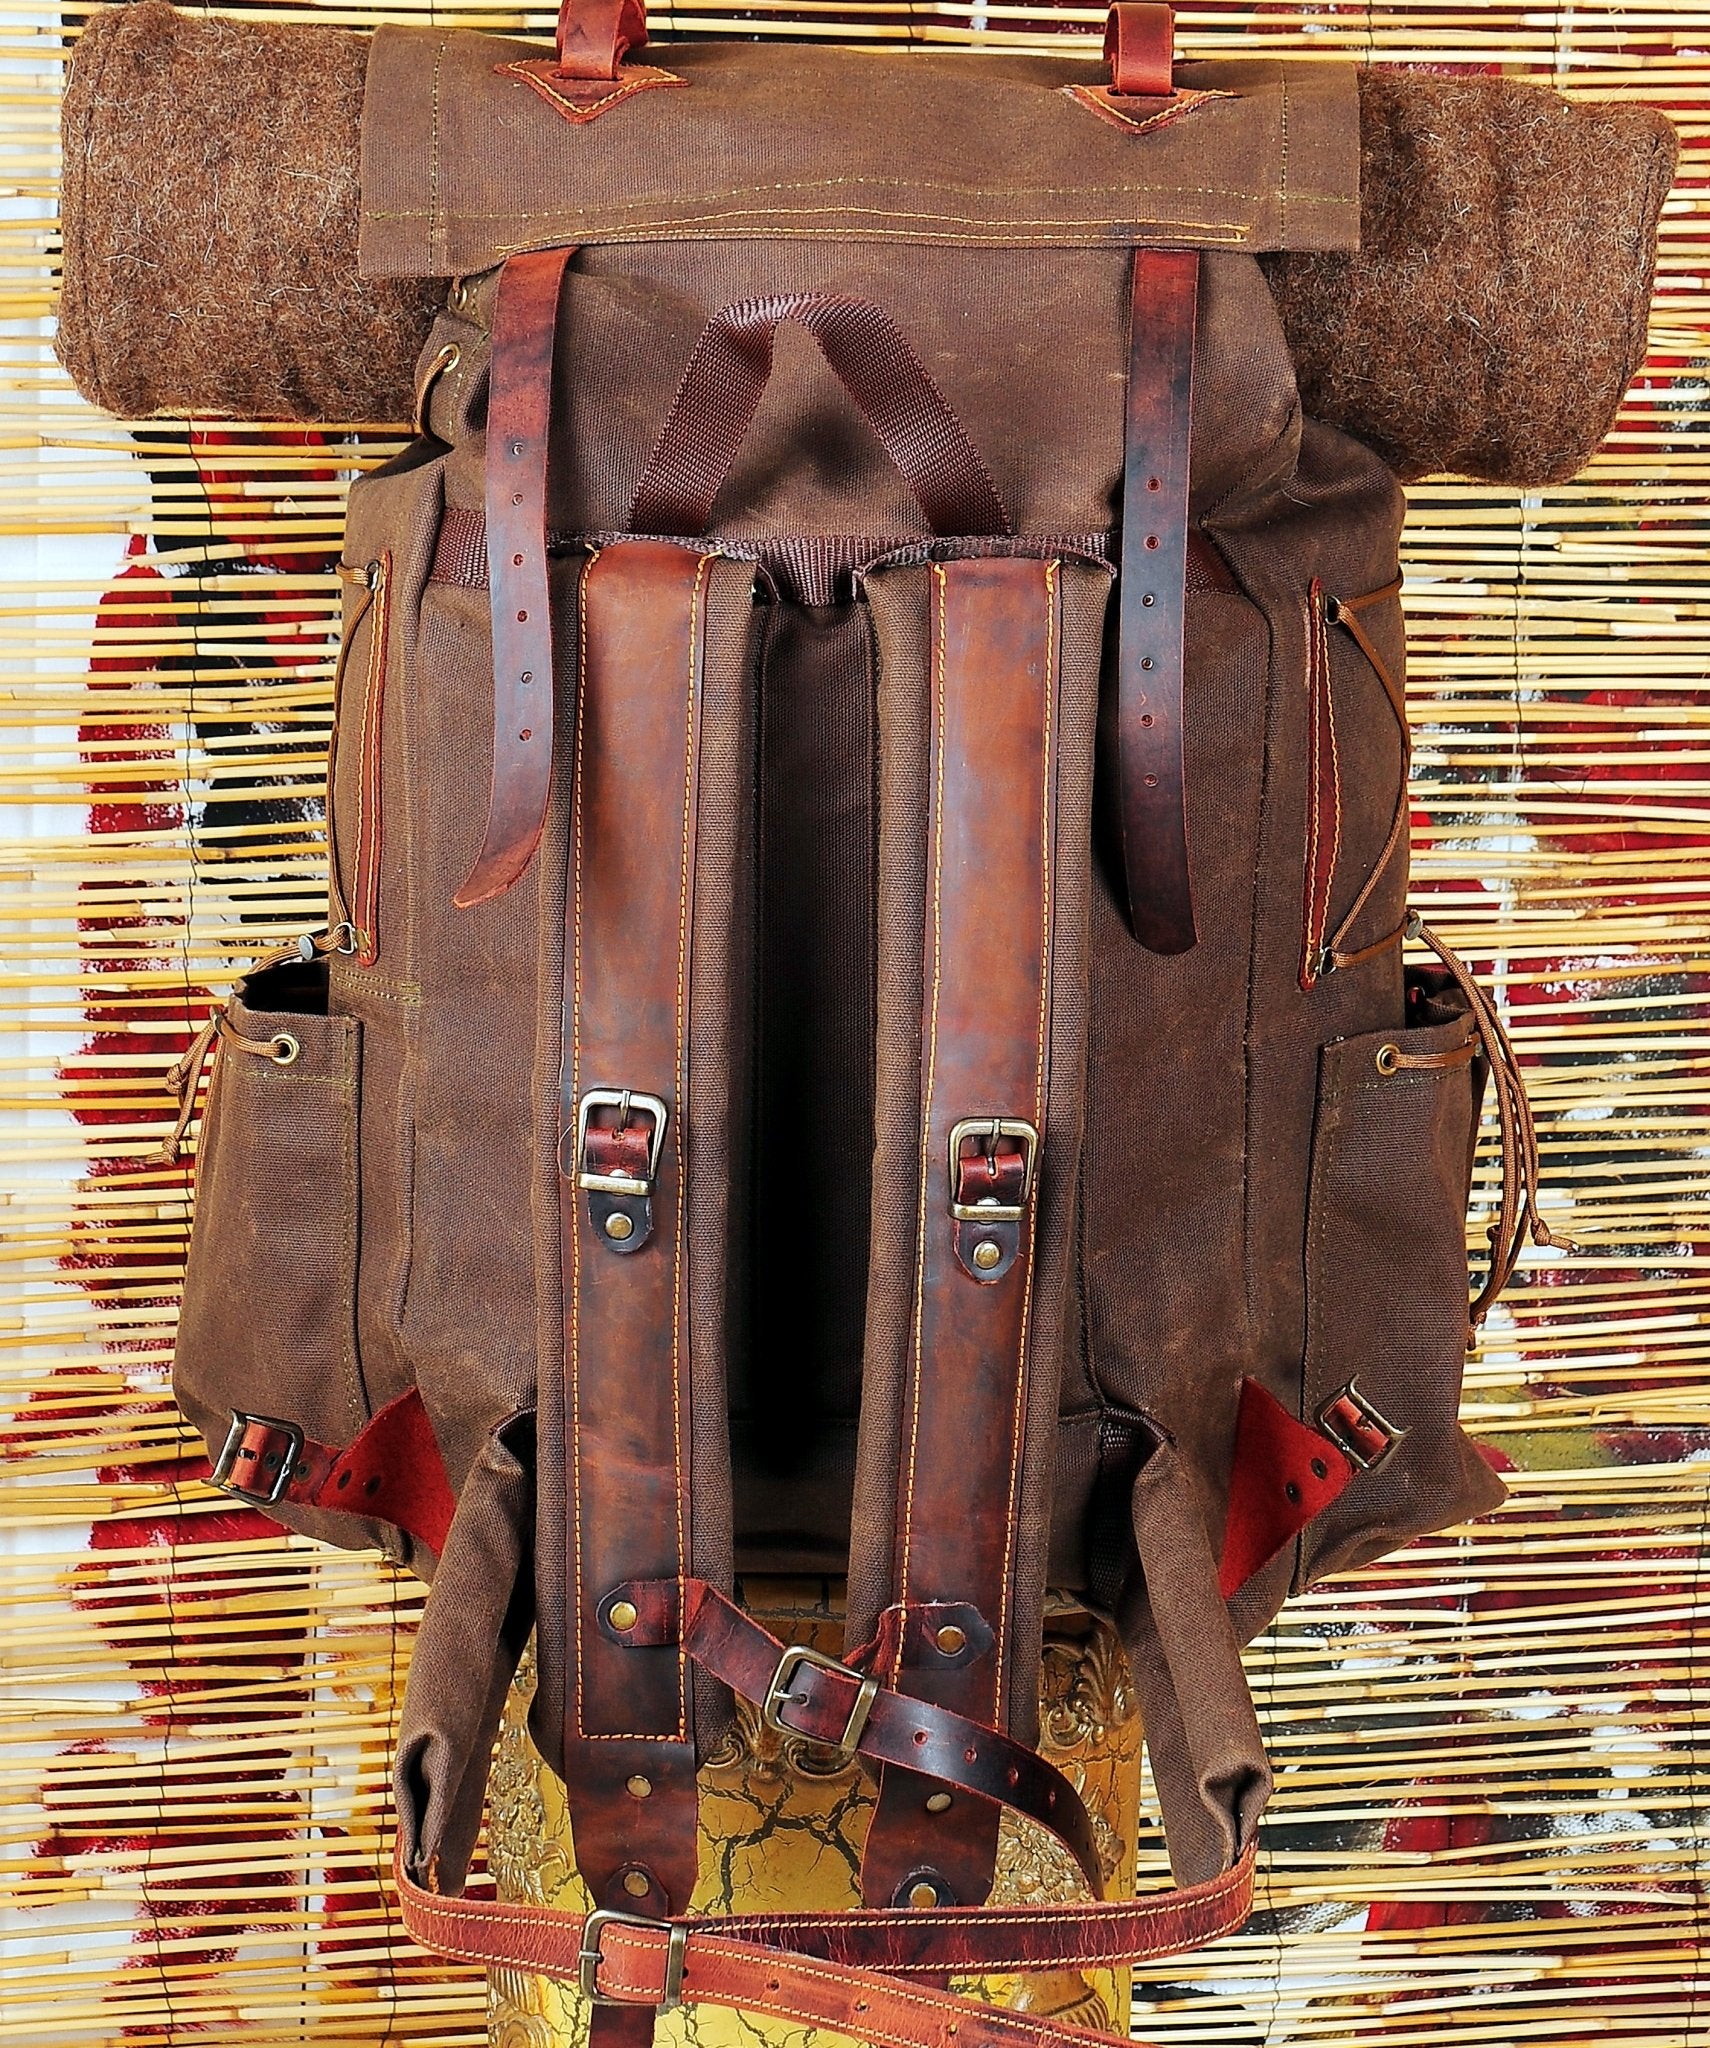 30L to 50L | Bushcraft Backpack | Brown, Green, Dhaki Colours | Handmade  Leather, Waxed Canvas Backpack for Travel-Camping | Personalization